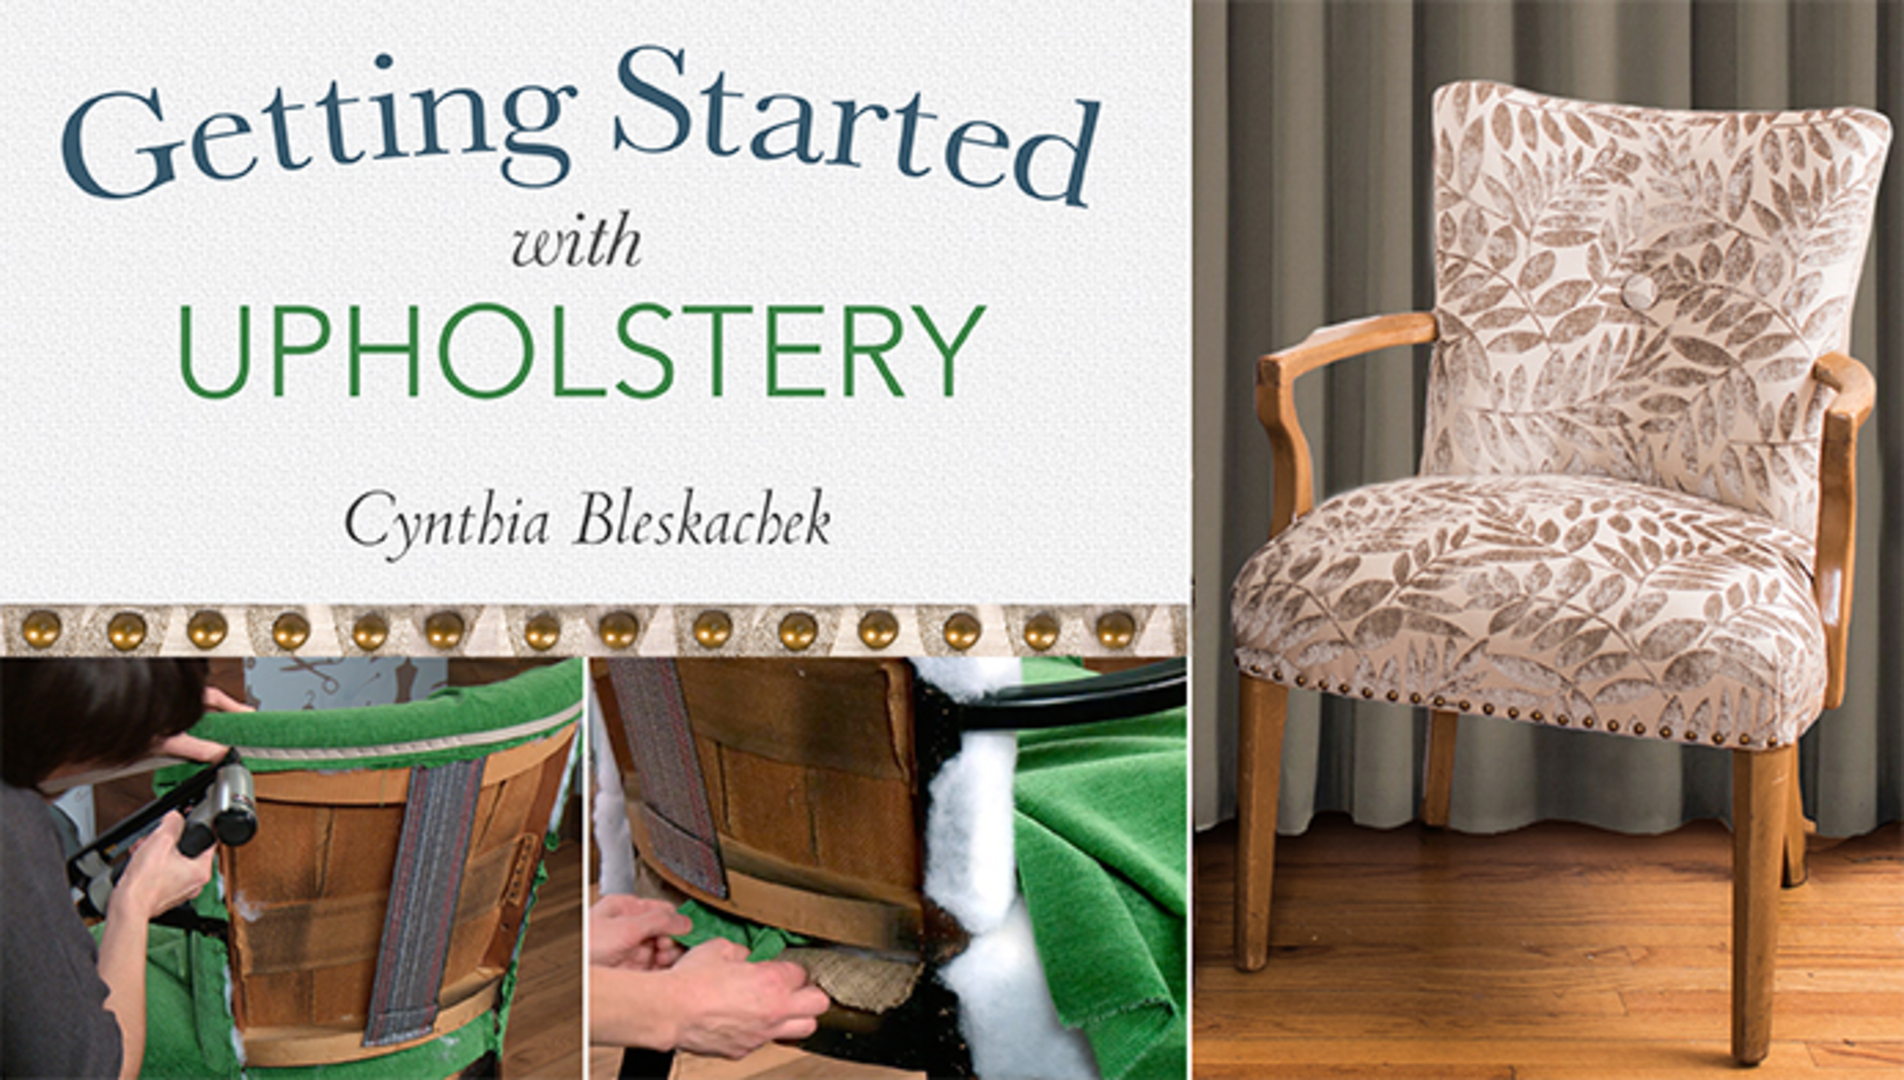 3 Types of Upholstery Tack Strips & How to Use Them  Upholstery tacks,  Furniture reupholstery, Reupholster furniture